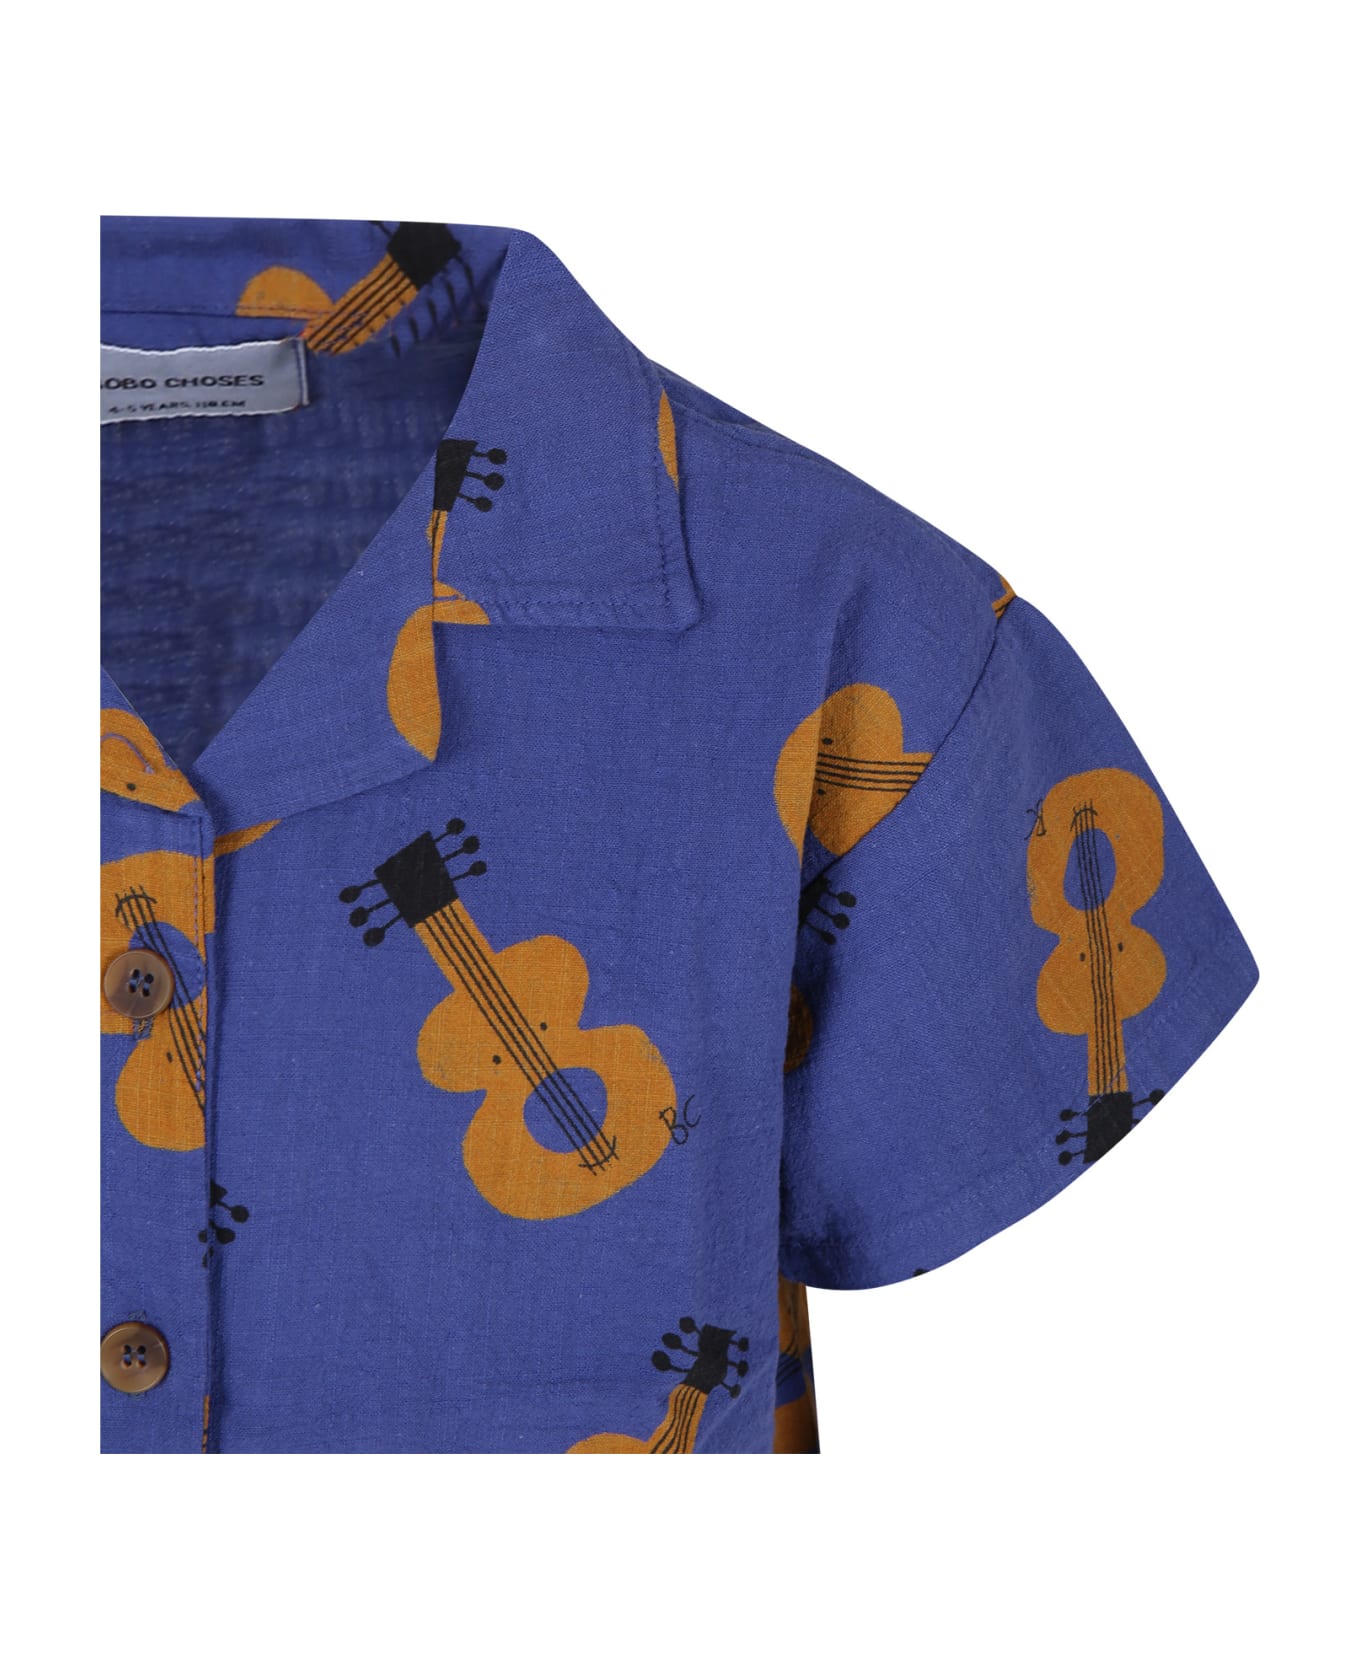 Bobo Choses Blue Shirt For Kids With All-over Guitars - Blue